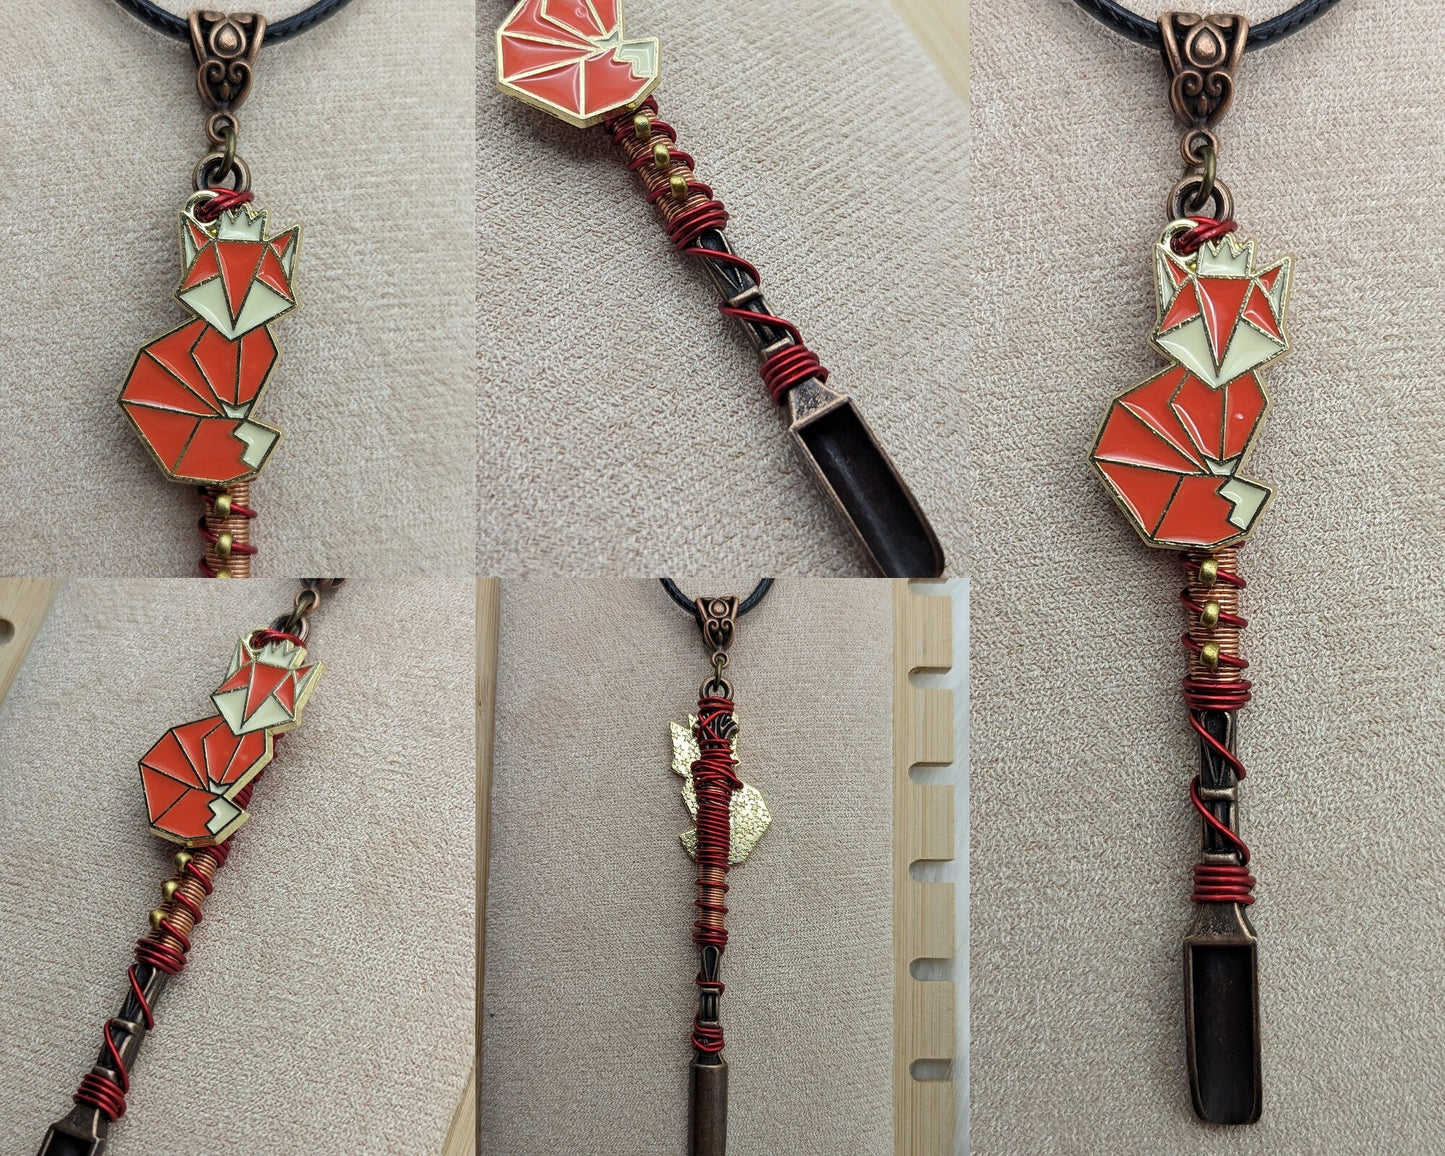 Fox Wire Wrapped Spoon Necklace and Keychain - Groove Spoons